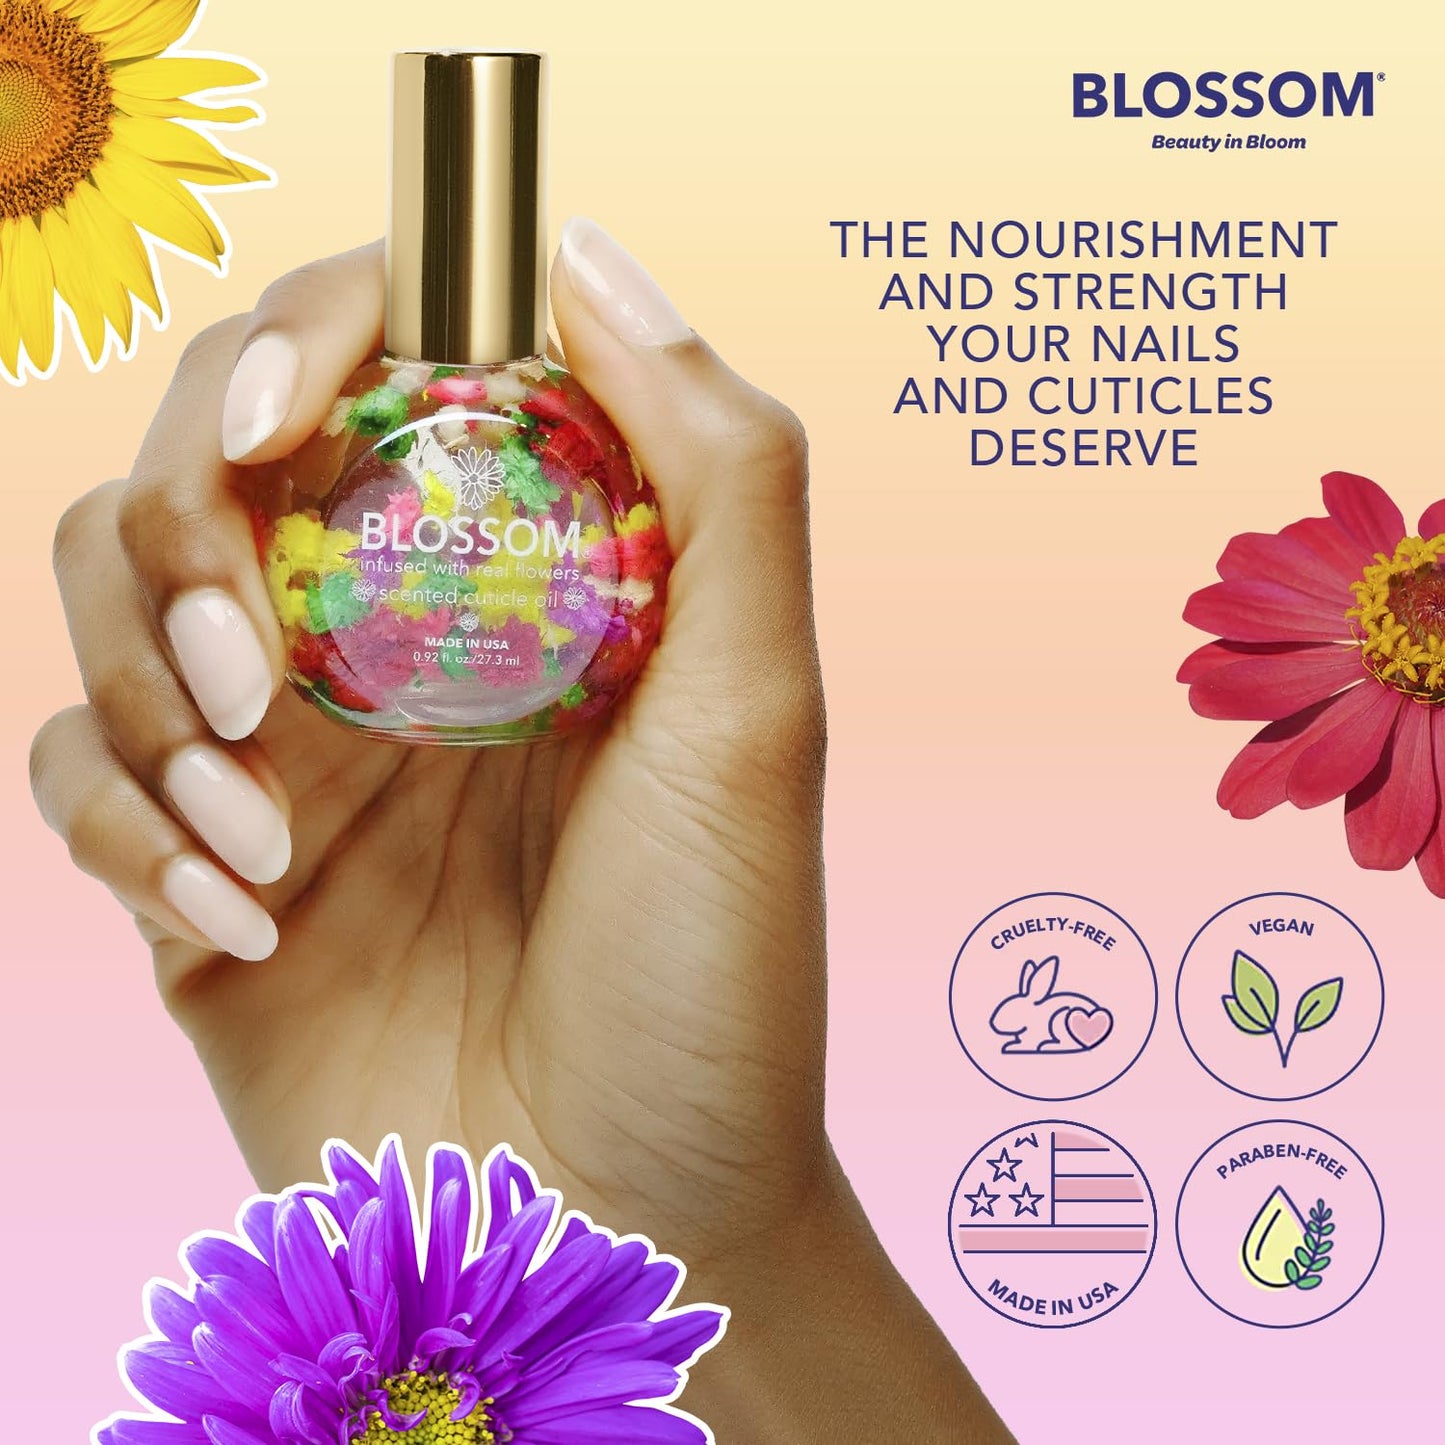 Blossom Hydrating, Moisturizing, Strengthening, Scented Cuticle Oil, Infused with Real Flowers, Made in USA, 0.92 Fl. Oz, Pineapple